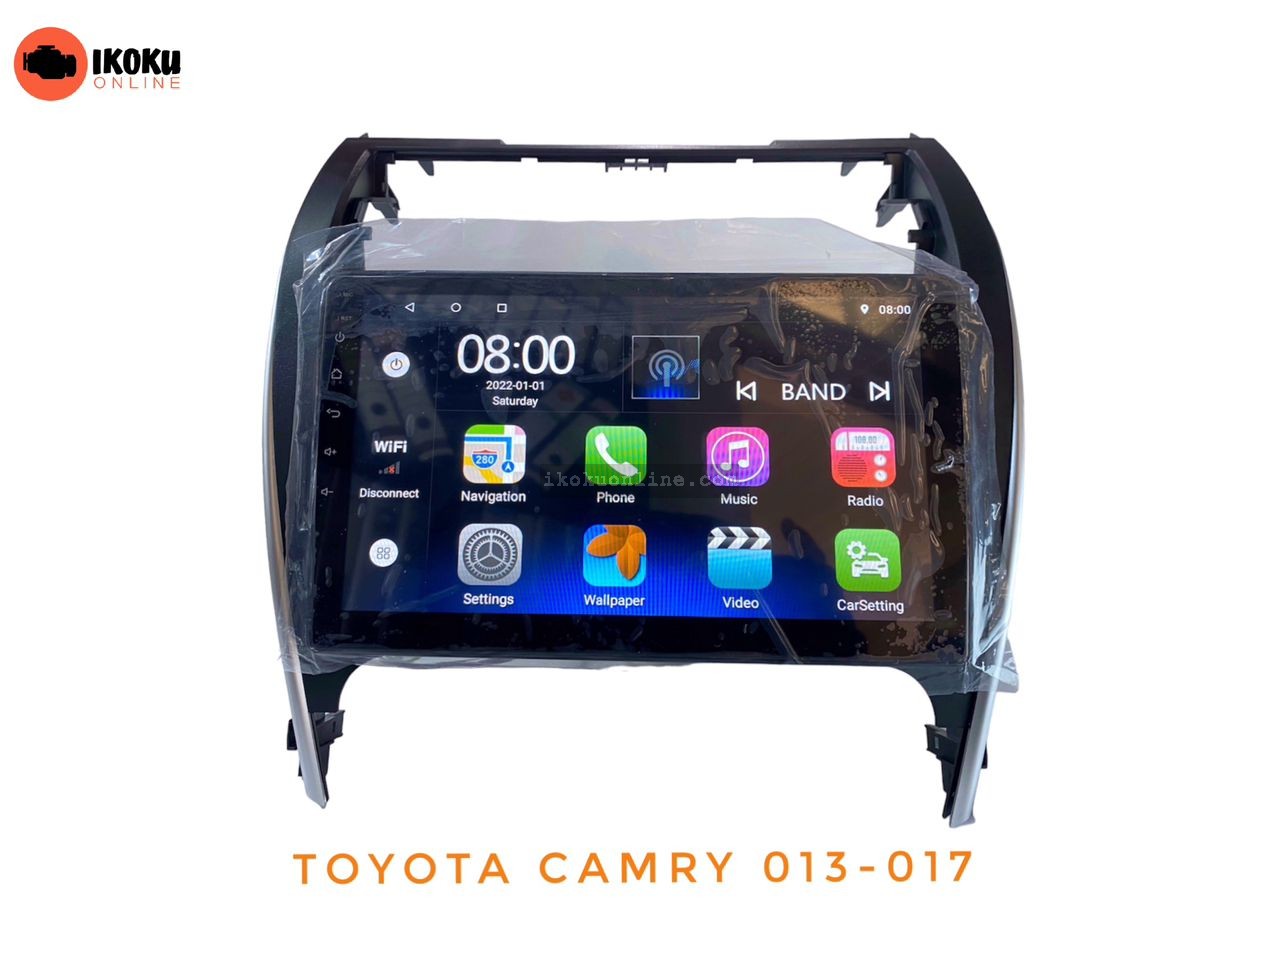 TOYOTA CAMRY 2013-2016 ANDROID SCREEN